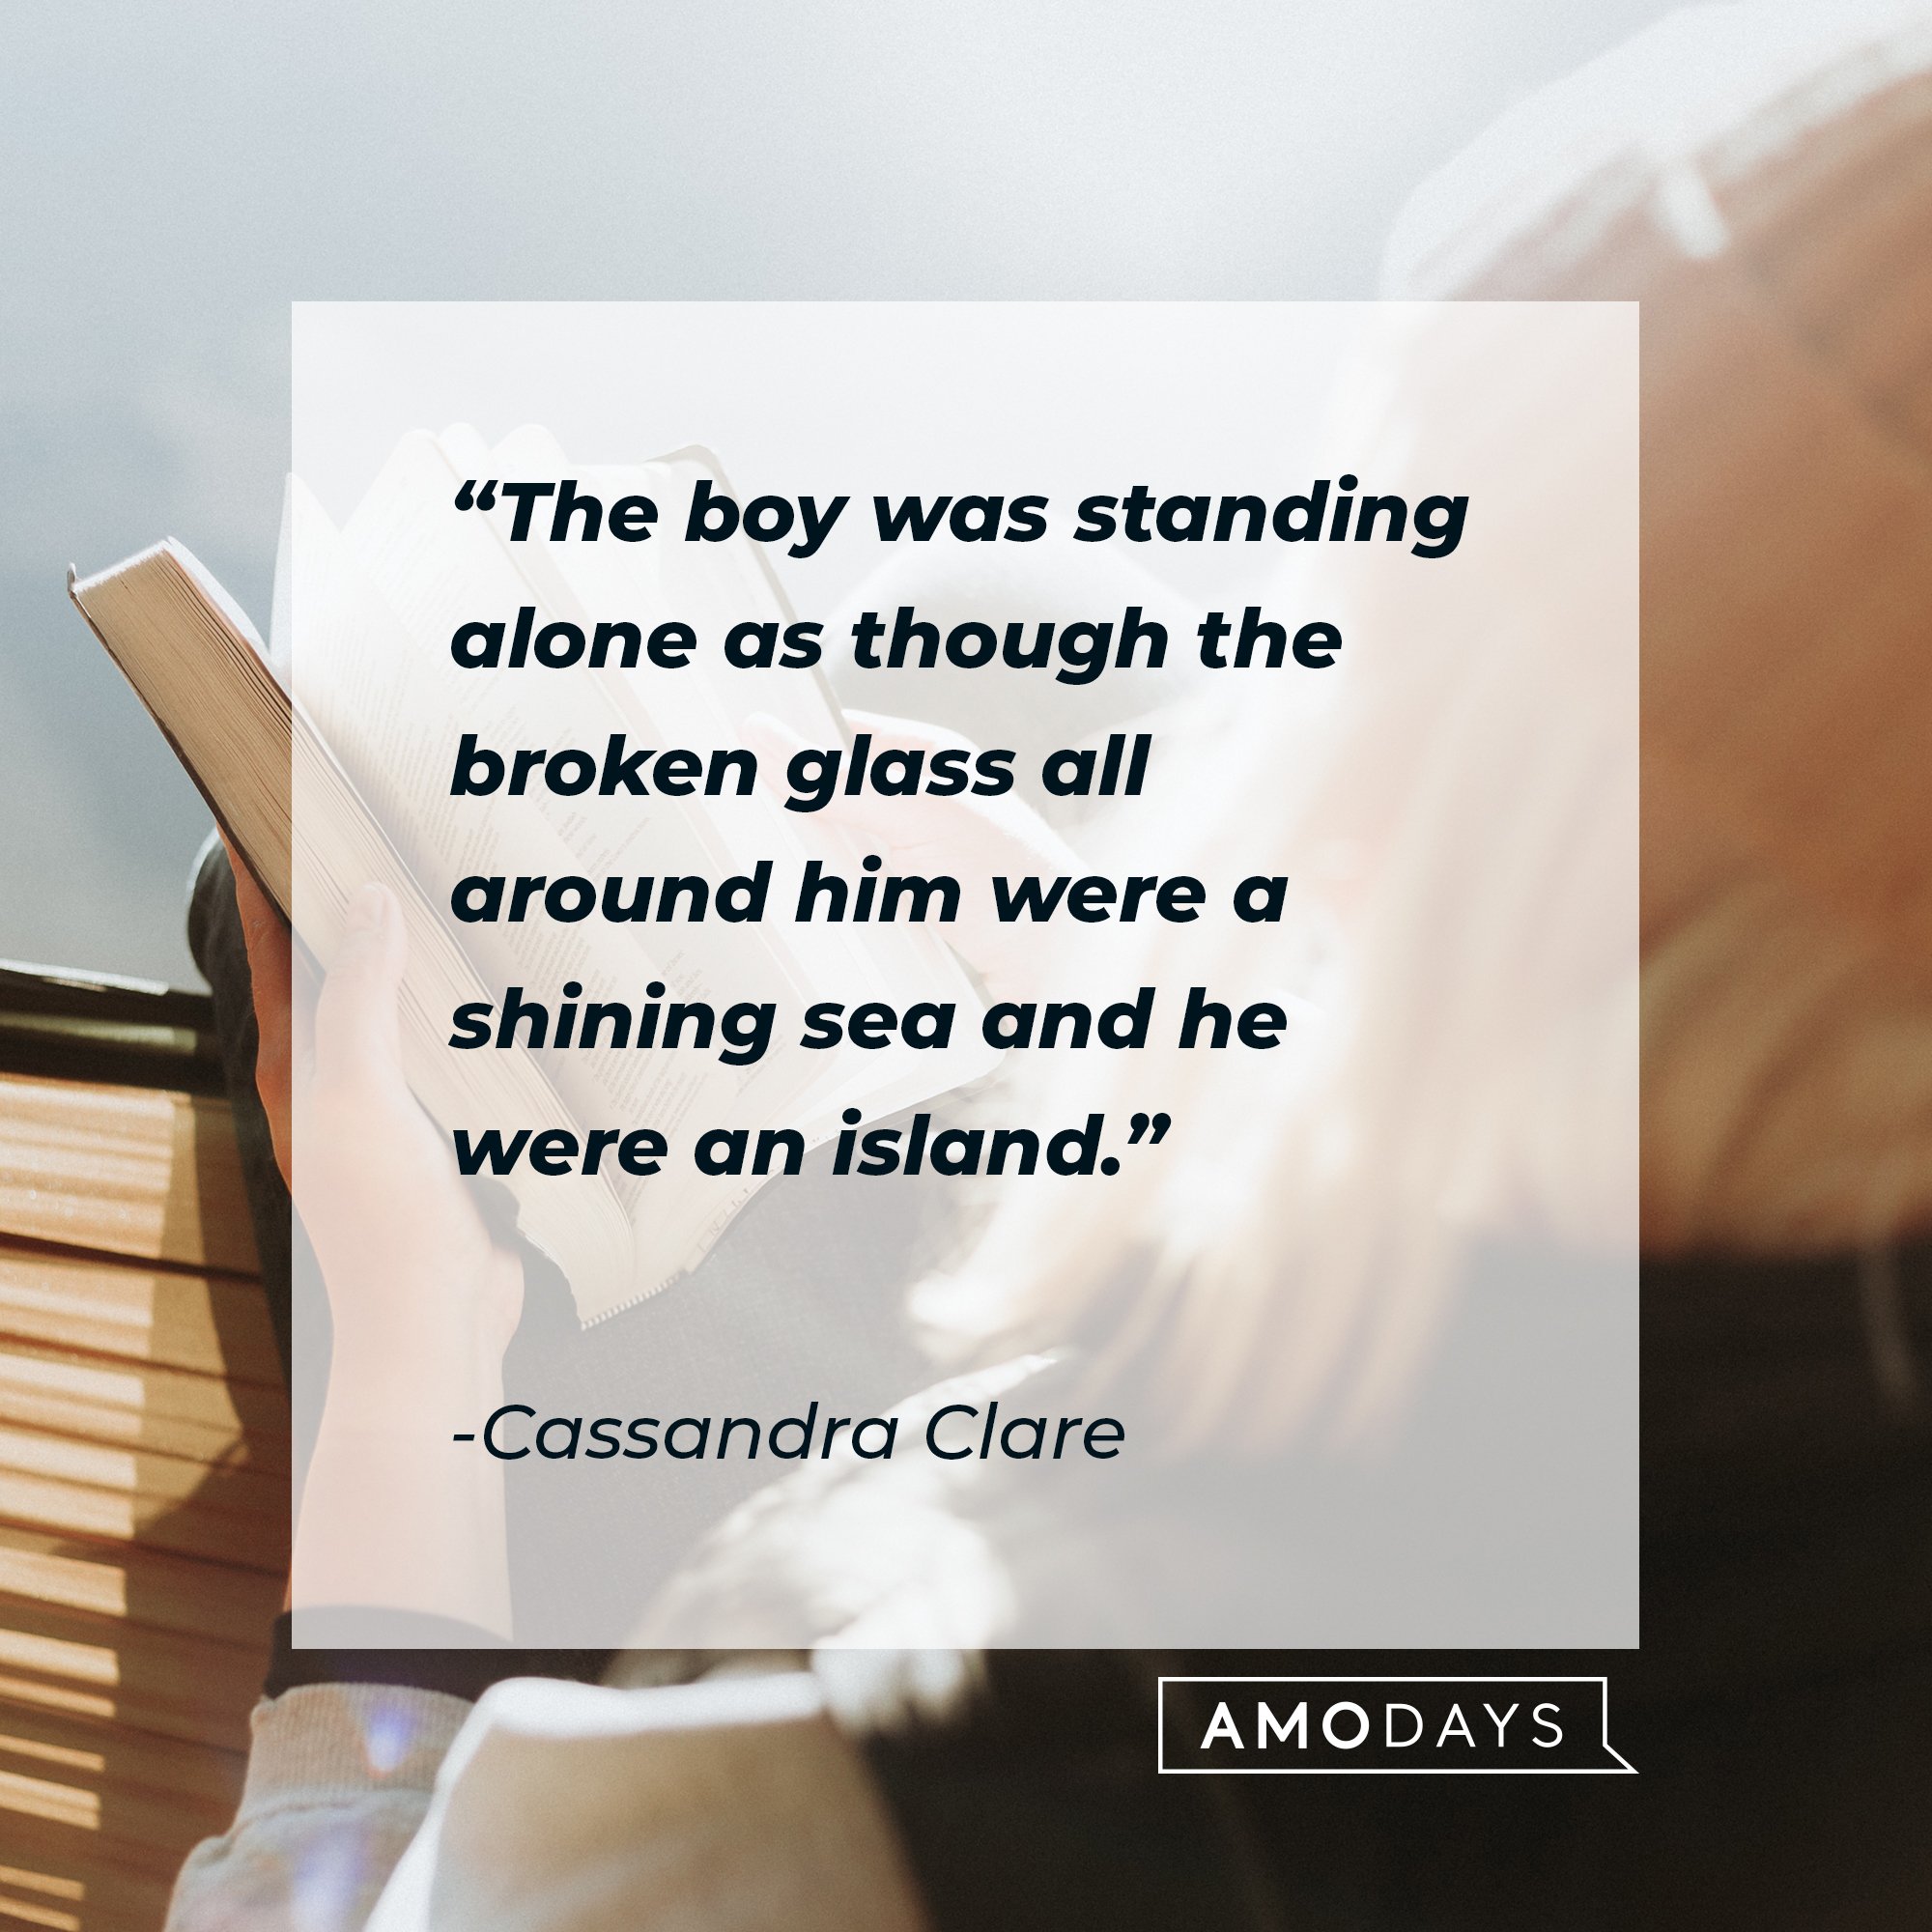 Cassandra Clare’s quote: "The boy was standing alone as though the broken glass all around him were a shining sea and he were an island." | Image: AmoDays  